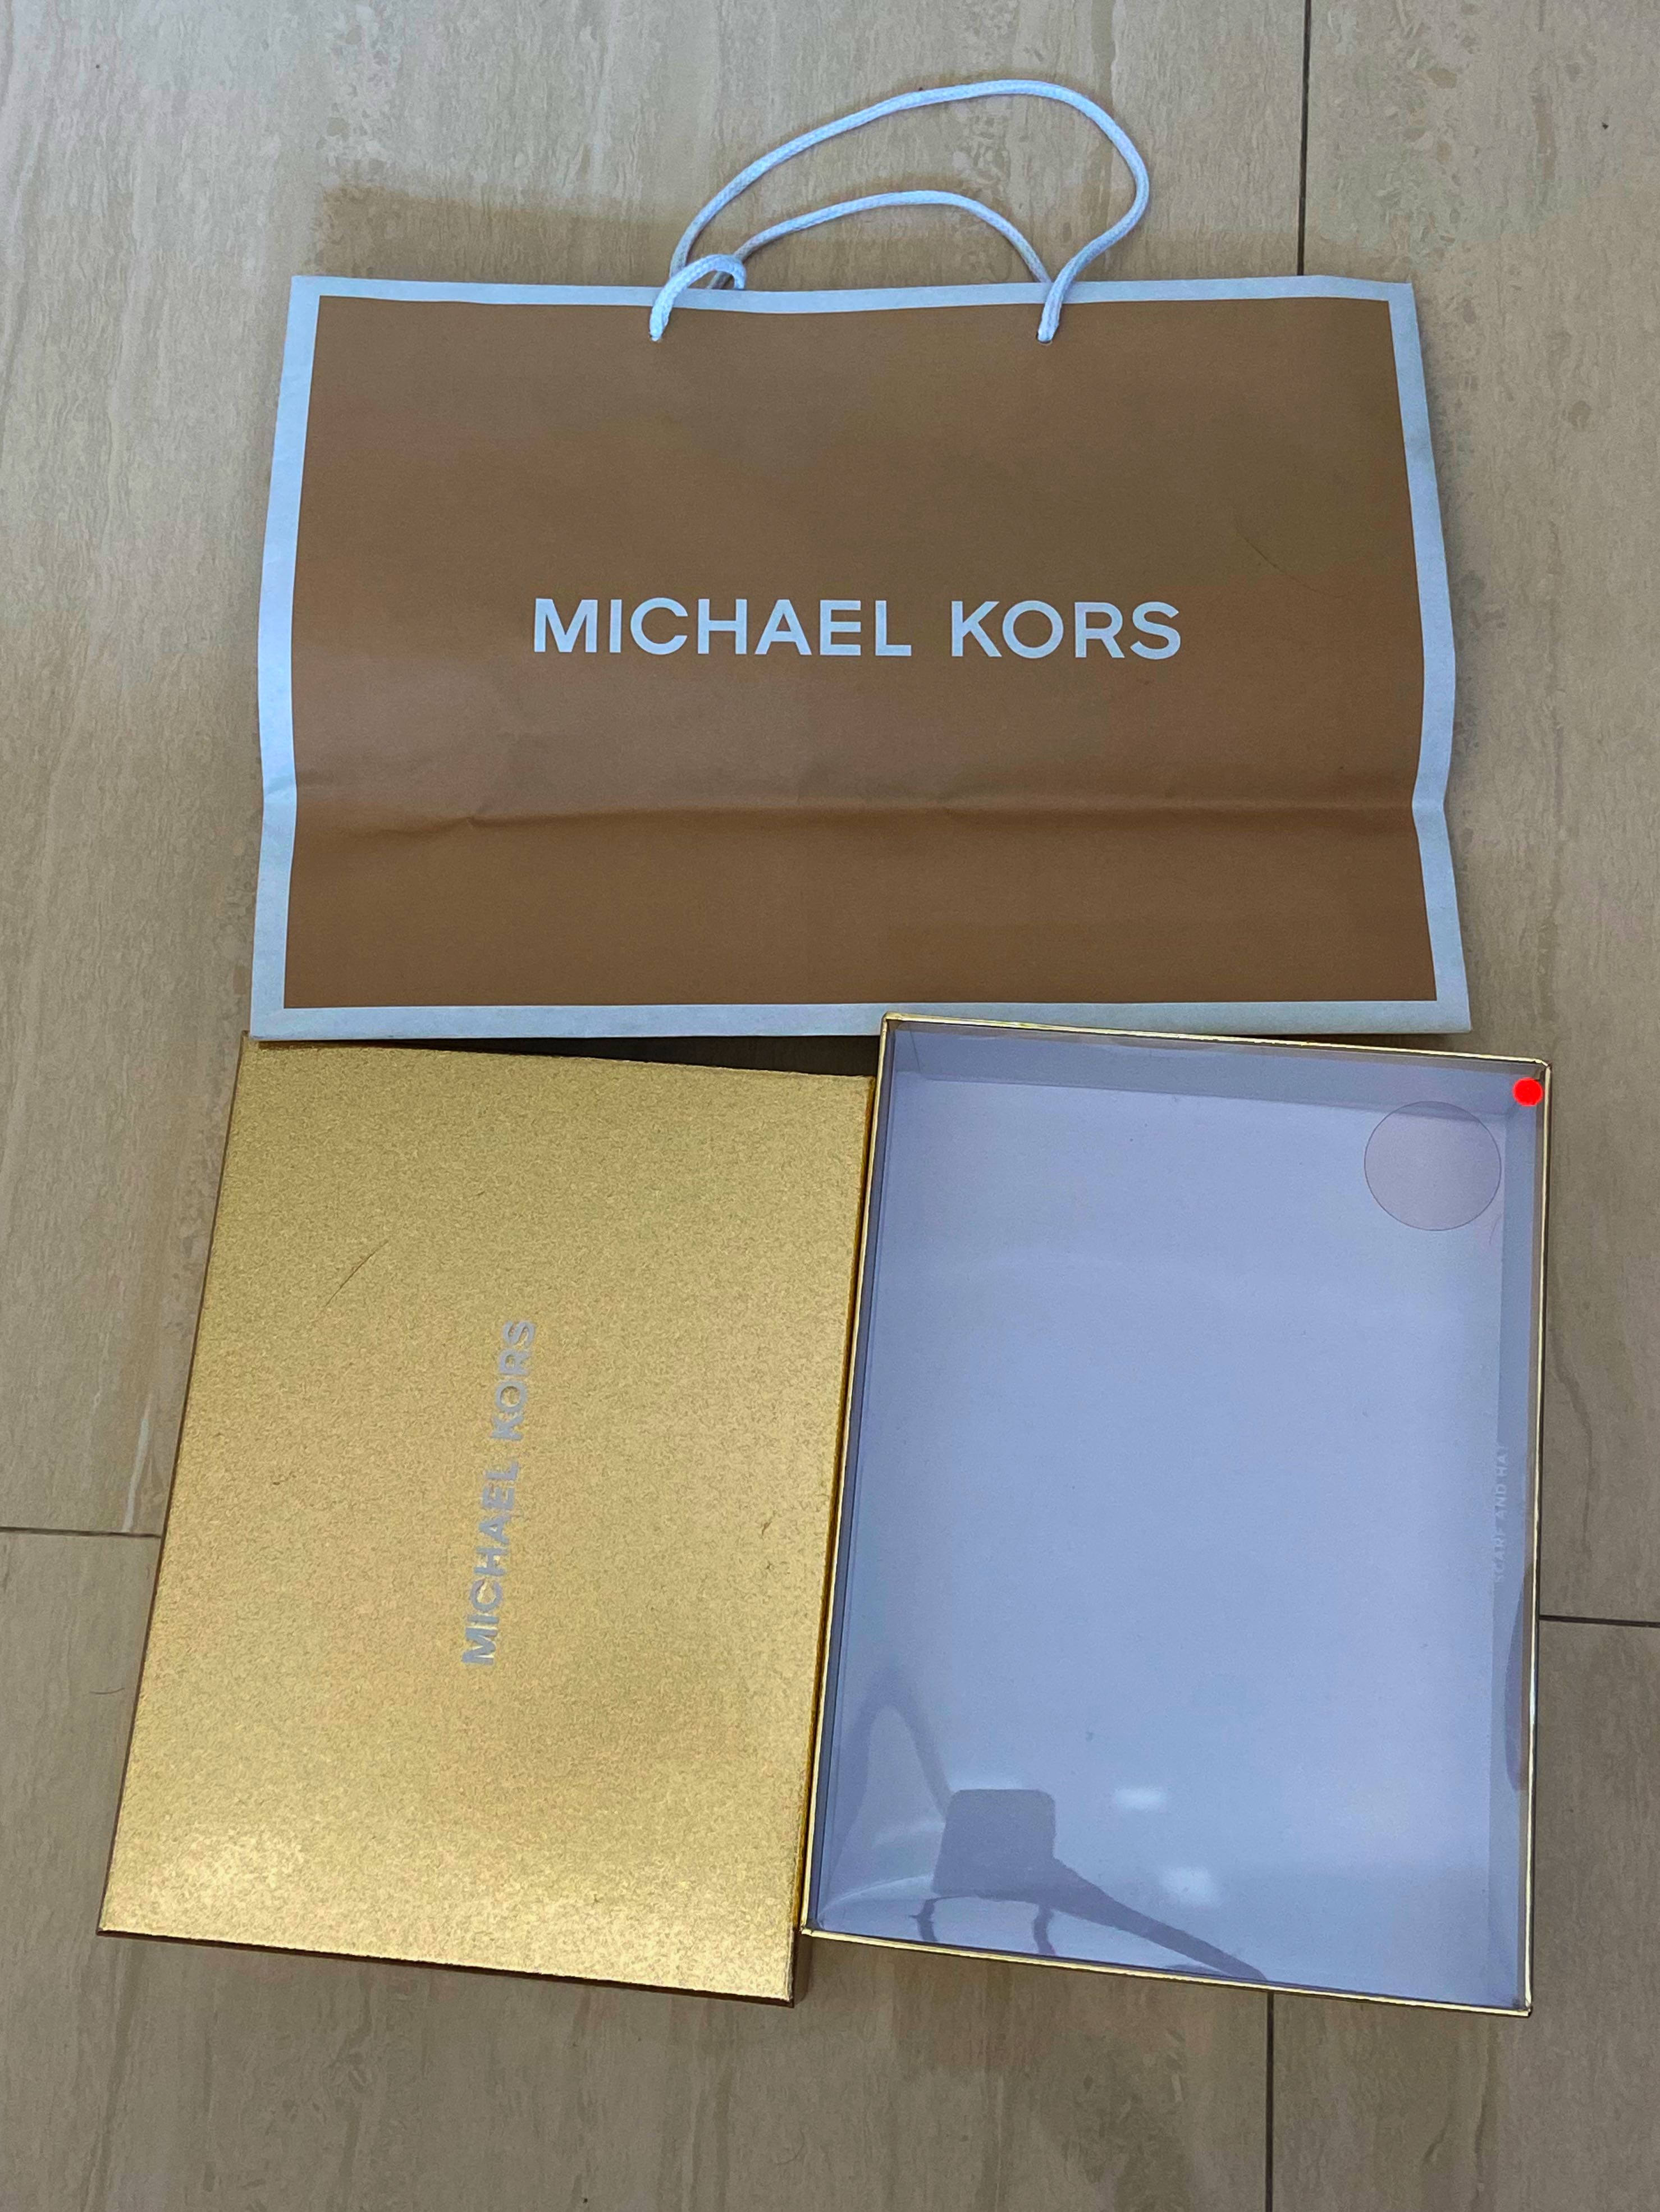 Michael Kors Gift Wrapping Paper Online Store, 51% OFF 